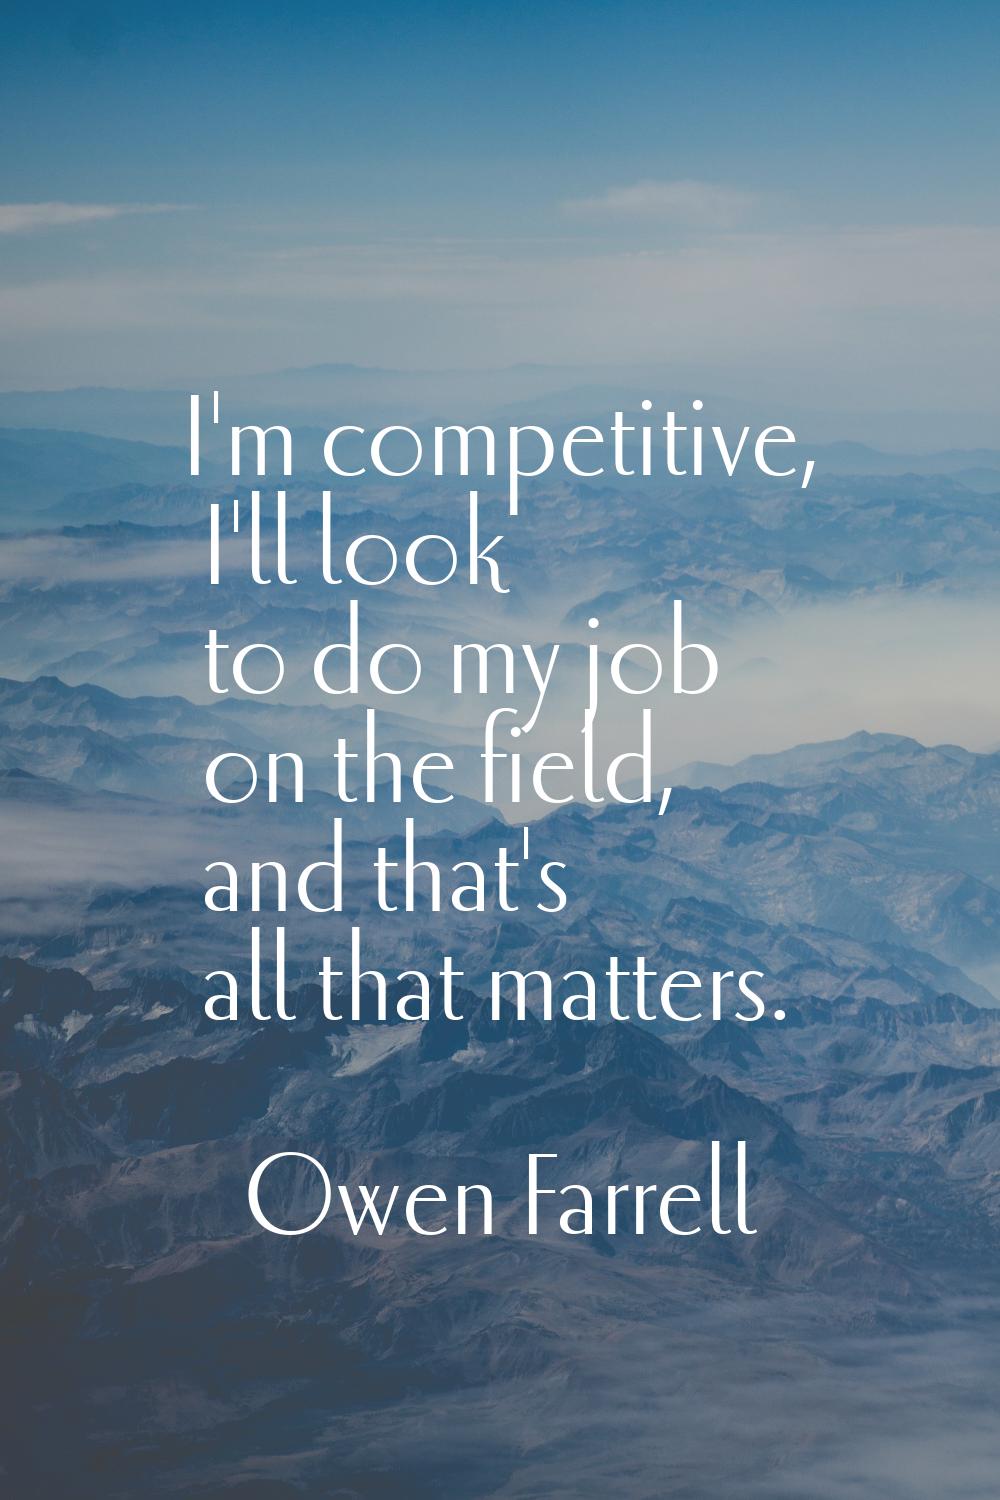 I'm competitive, I'll look to do my job on the field, and that's all that matters.